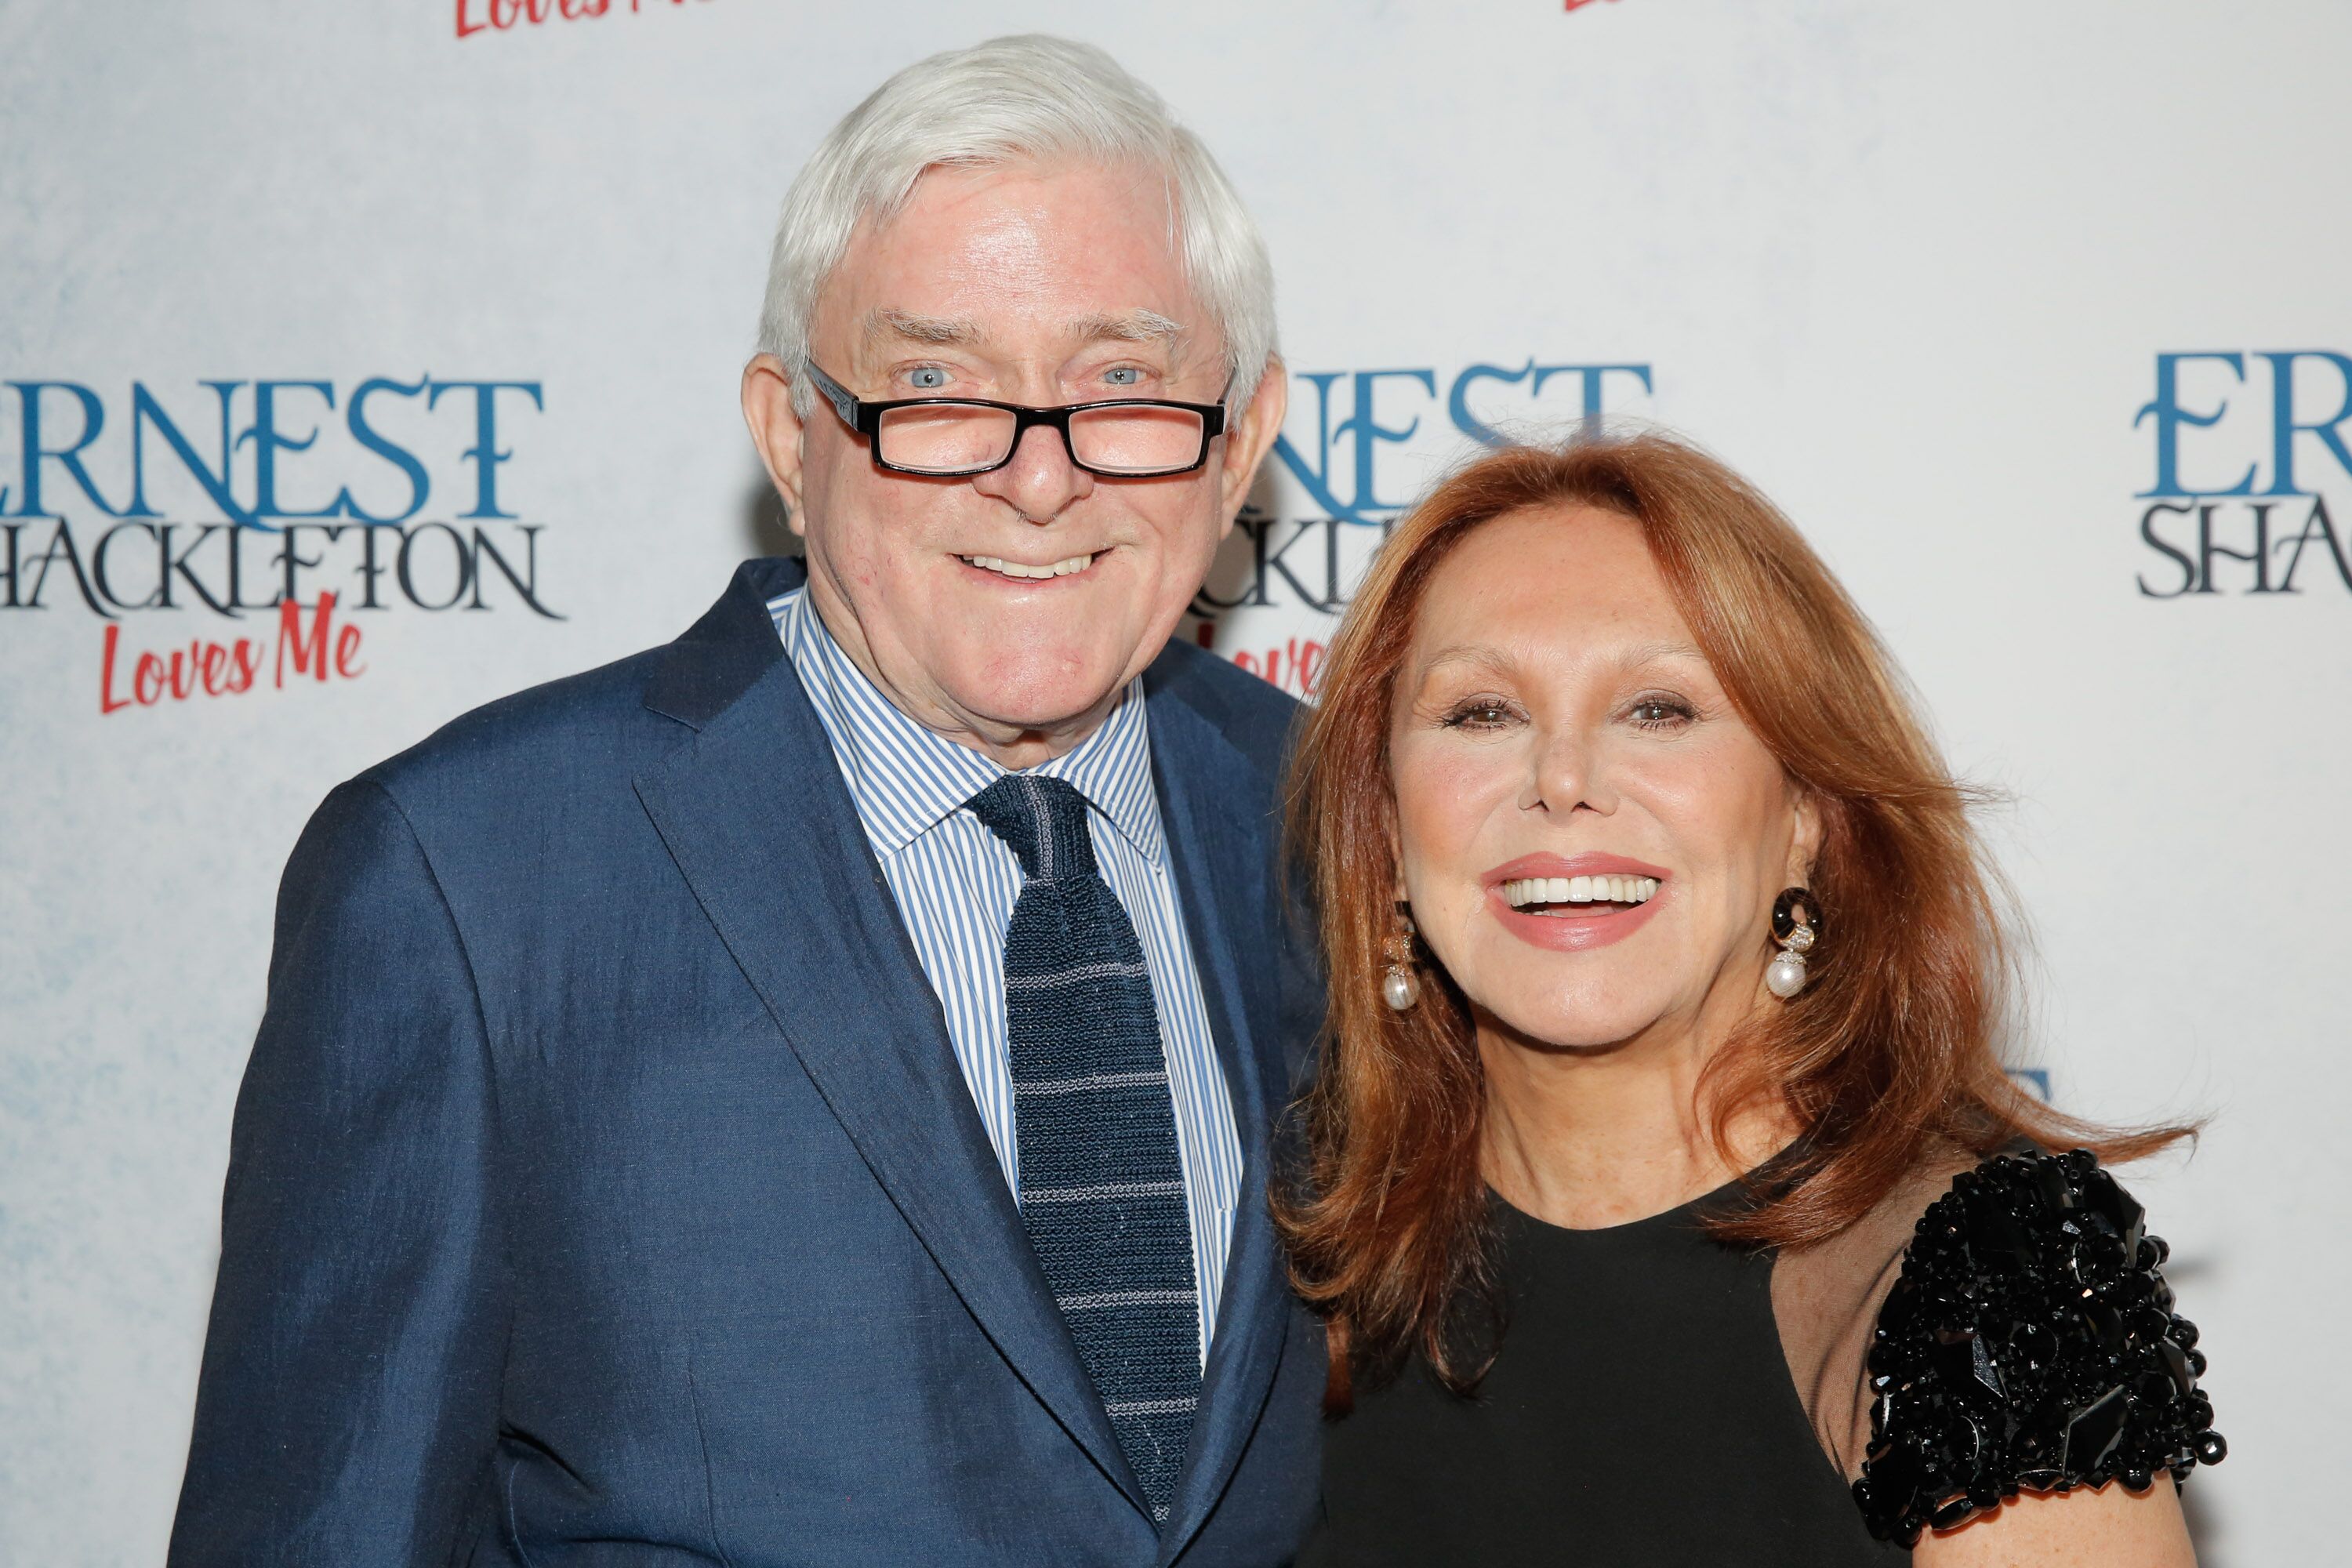 Phil Donahue and Marlo Thomas attend the Off-Broadway opening of "Ernest Shackleton Loves Me" at the Tony Kiser Theatre | Getty Images